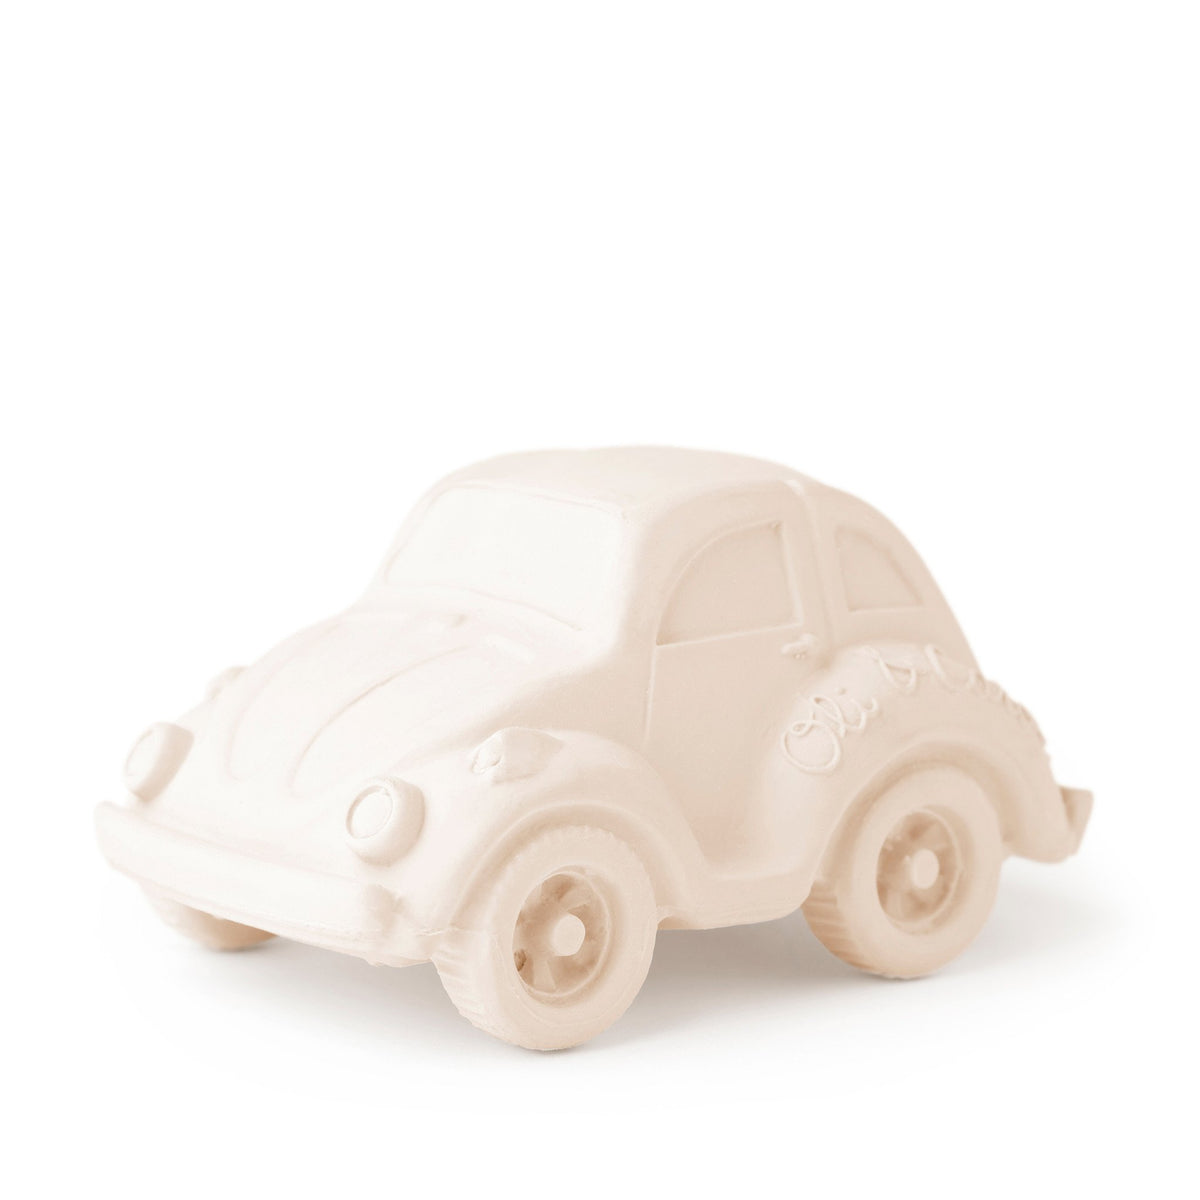 oli-and-carol-small-beetle-cars-in-6-colors-baby-play-learn-swim-olic-l-bc-07